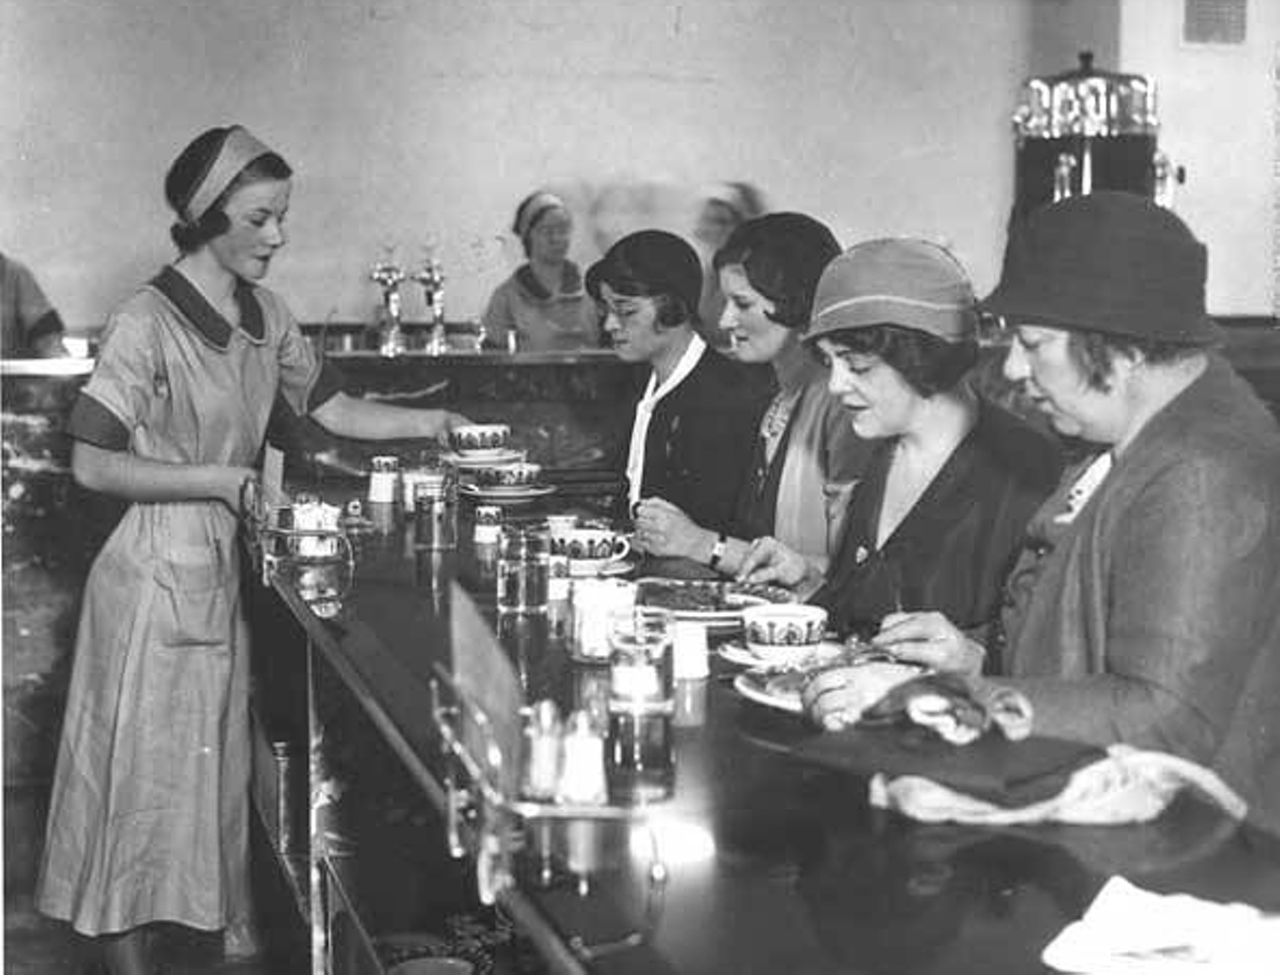 Lunch counter at Halle's, 1932.